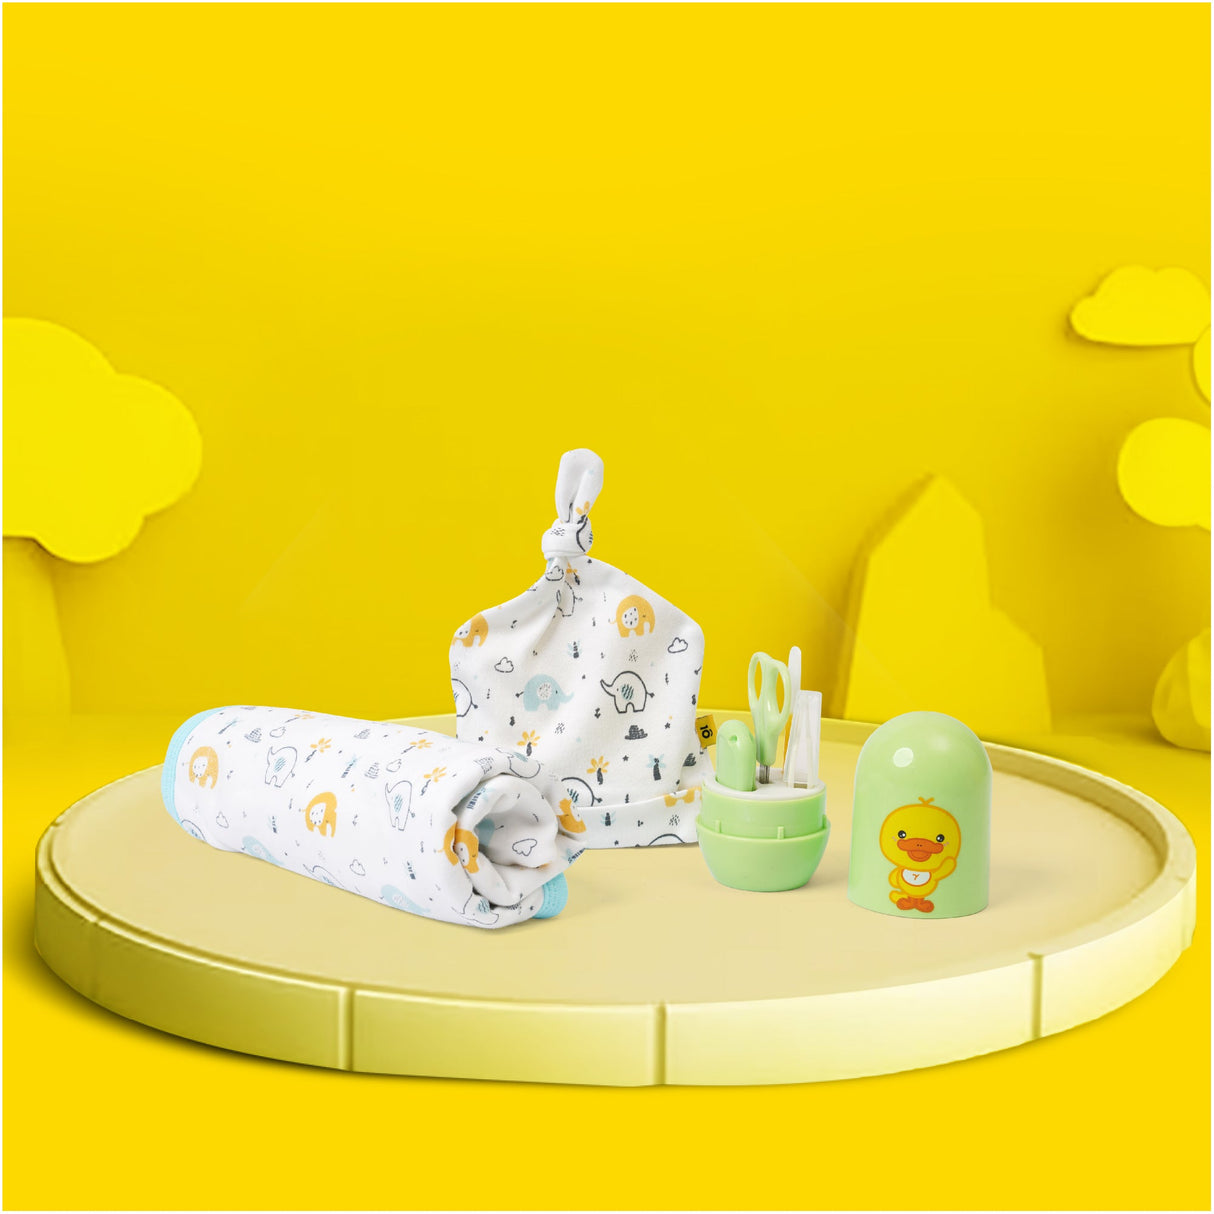 New Baby Gift Set- Baby Blanket, Cap and Nail Care Kit